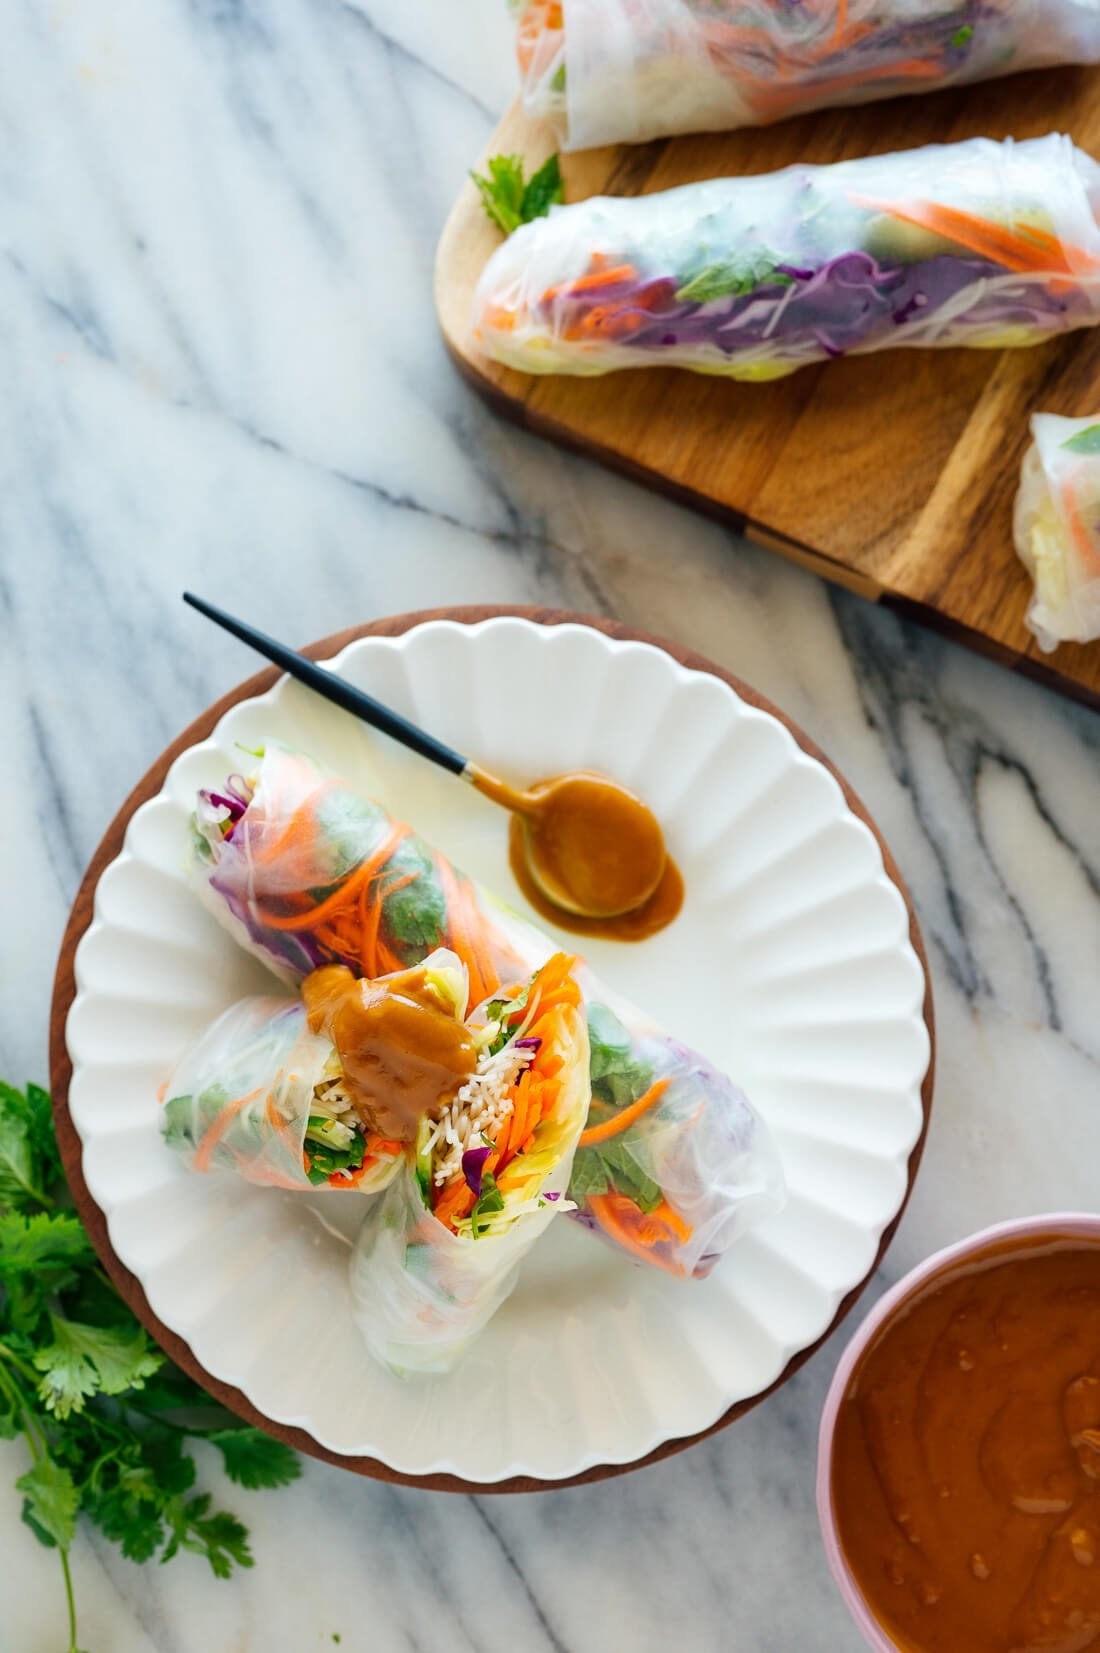 Vietnamese vegetable spring rolls with peanut dipping sauce